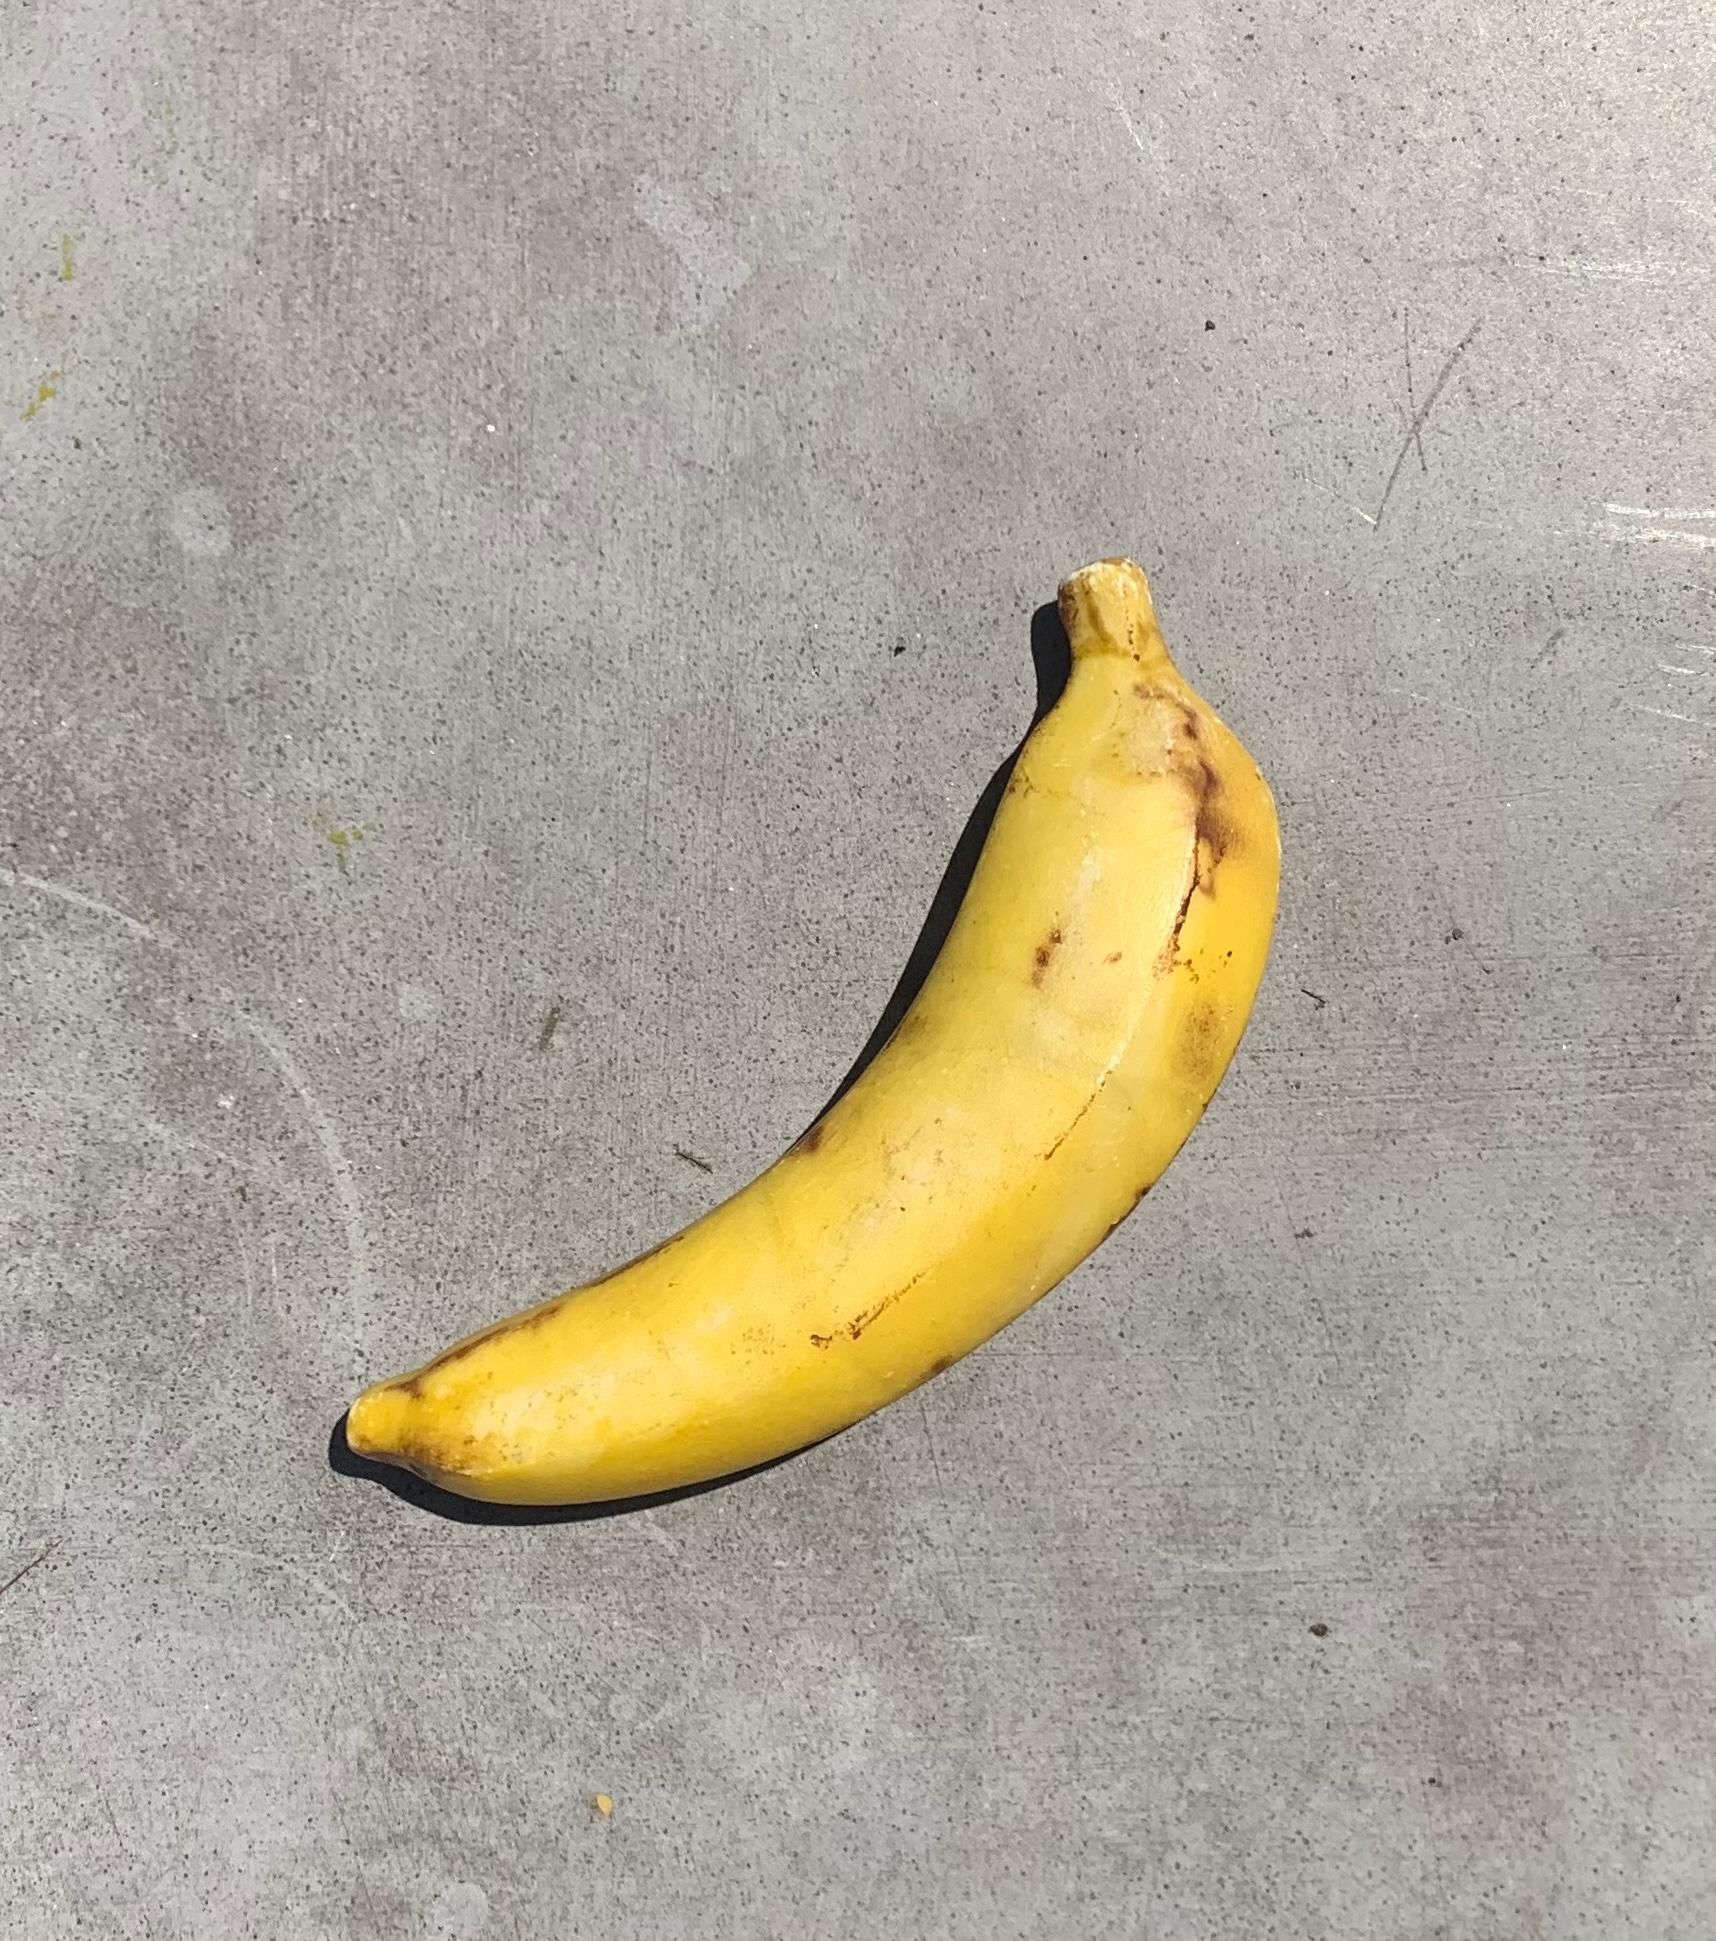 An expertly crafted marble sculpture / objet d’art of a bruised banana. The bruises make it extremely rare; one does see vintage Italian marble fruit but I haven’t come across a bruised banana in all my years. Great as a paperweight, fabulous as a